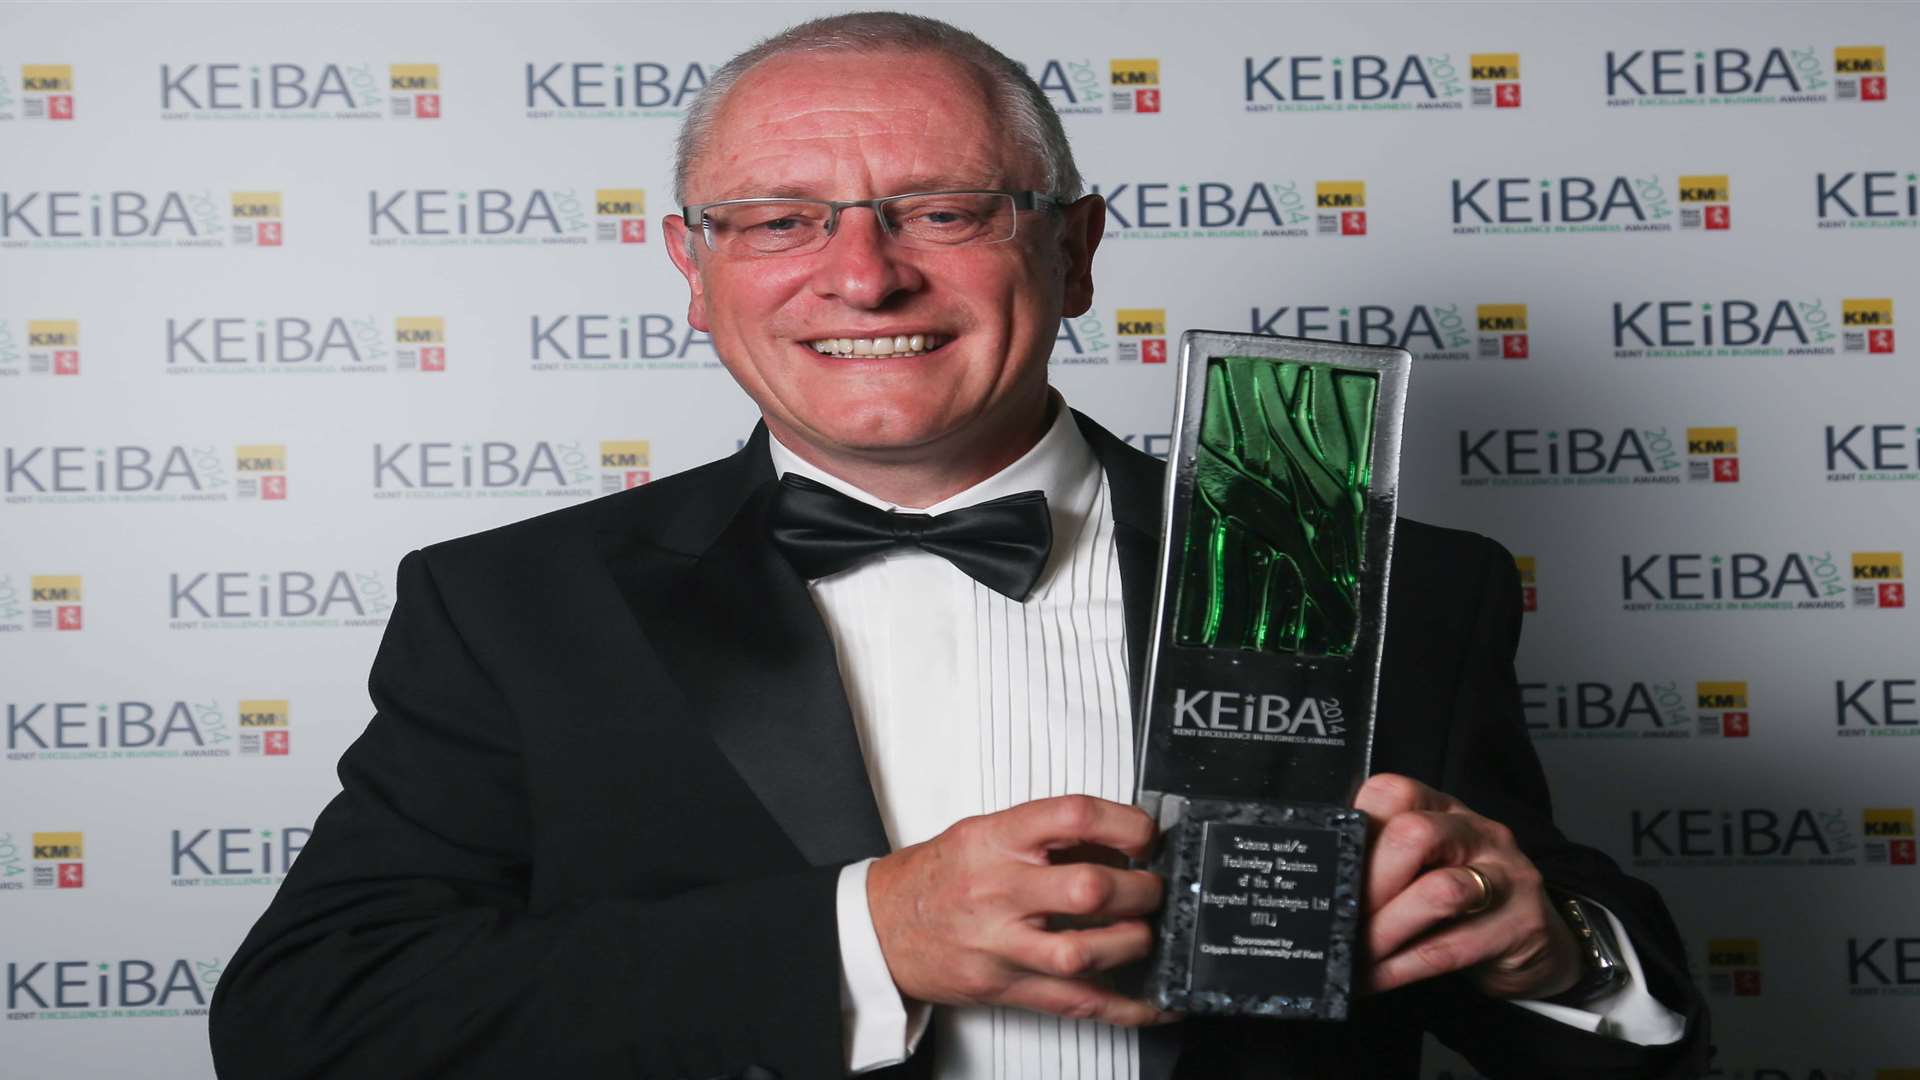 Tom Cole of Integrated Technologies Limited from Ashford who took home two KEiBA prizes